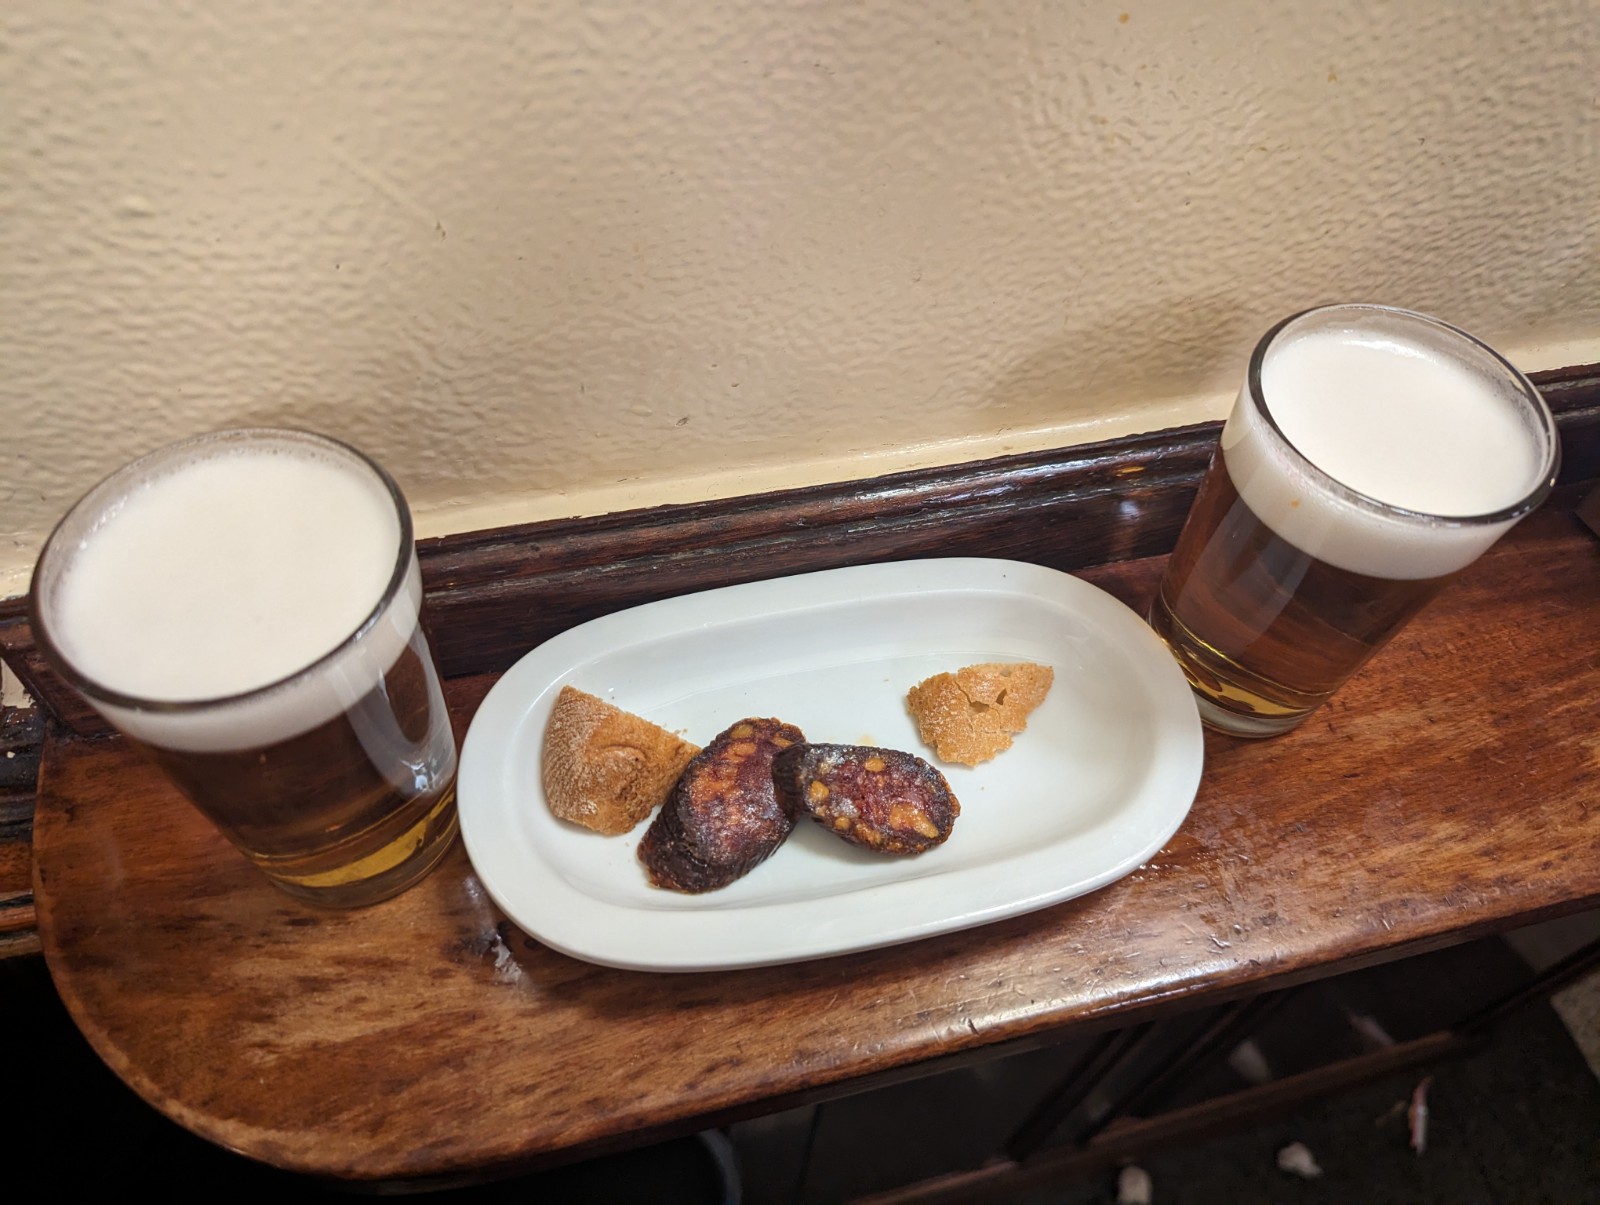 a plate of food and two glasses of beer on a wooden surface